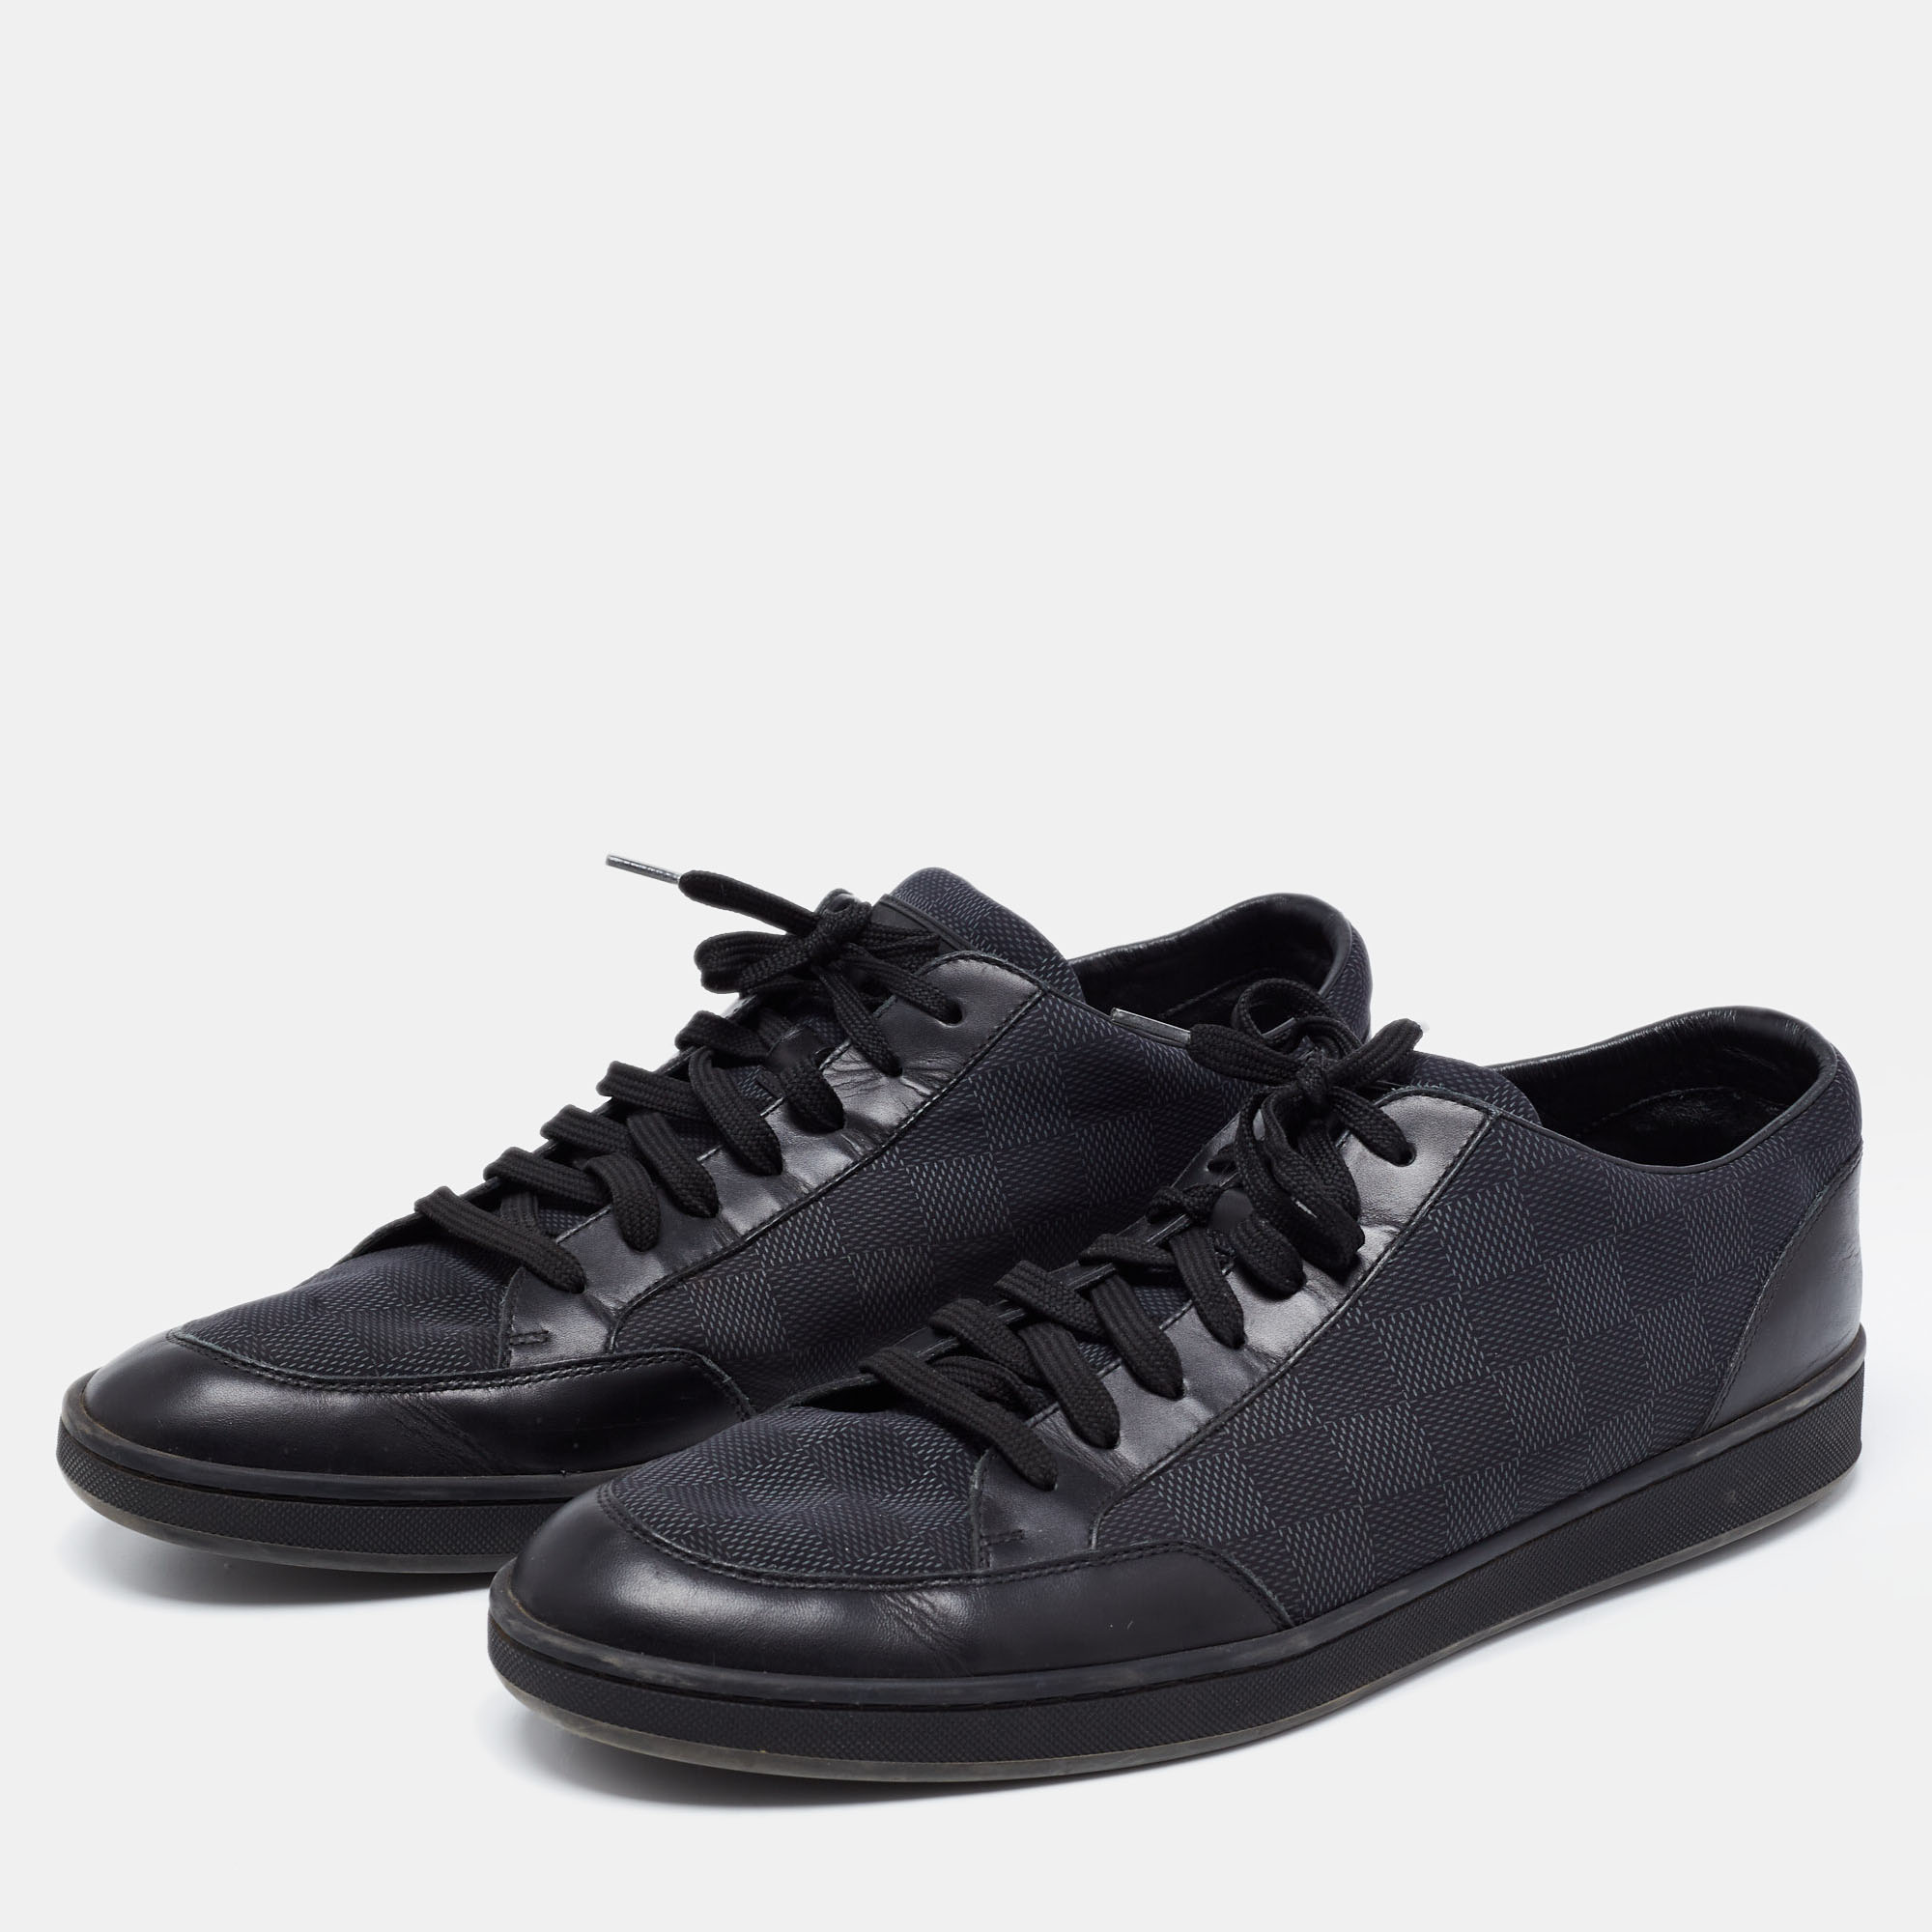 

Louis Vuitton Graphite/Black Damier Nylon and Leather Offshore Sneakers Size